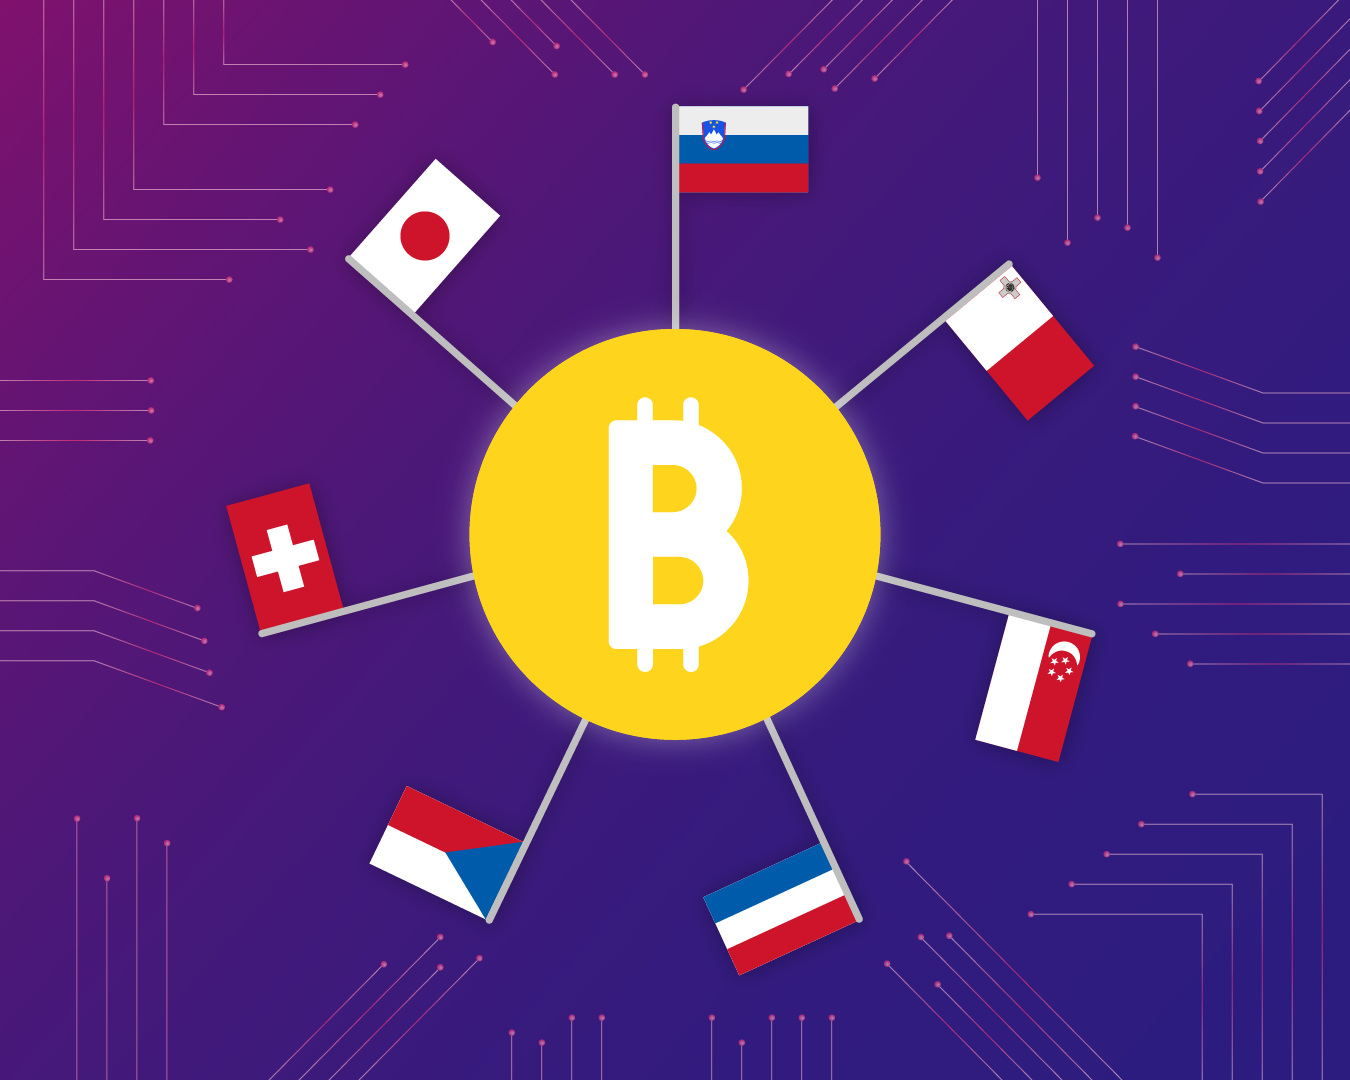 What Are The World's Most Crypto-Friendly Countries?